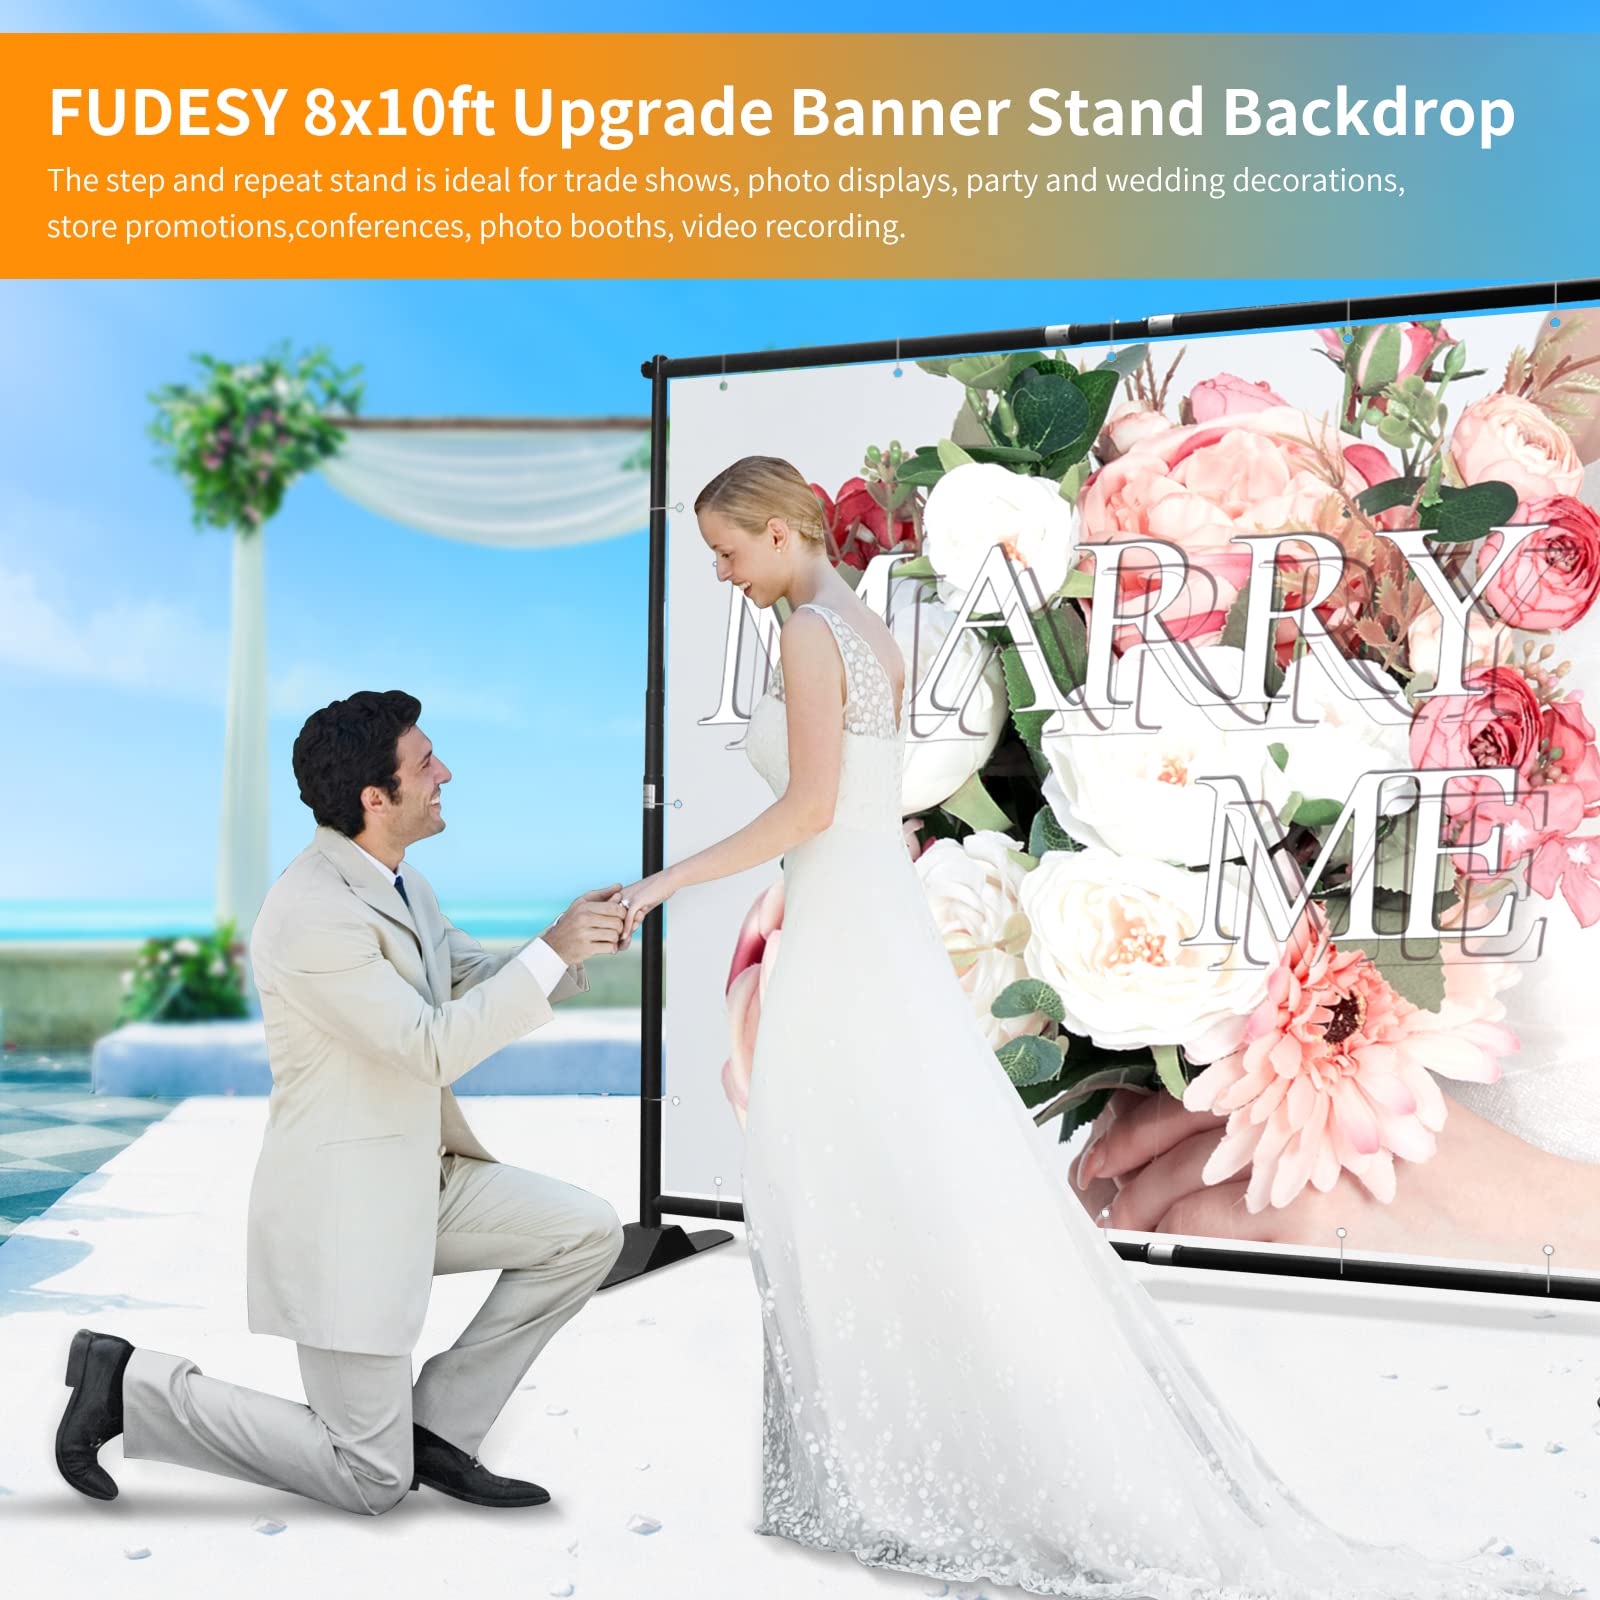 FUDESY 10x8 ft Backdrop Banner Stand, Heavy Duty Adjustable Background Stand Kit with Carrying Bag, Step and Repeat Photography Frame Stand for Trade Show Display Photo Booth Parties